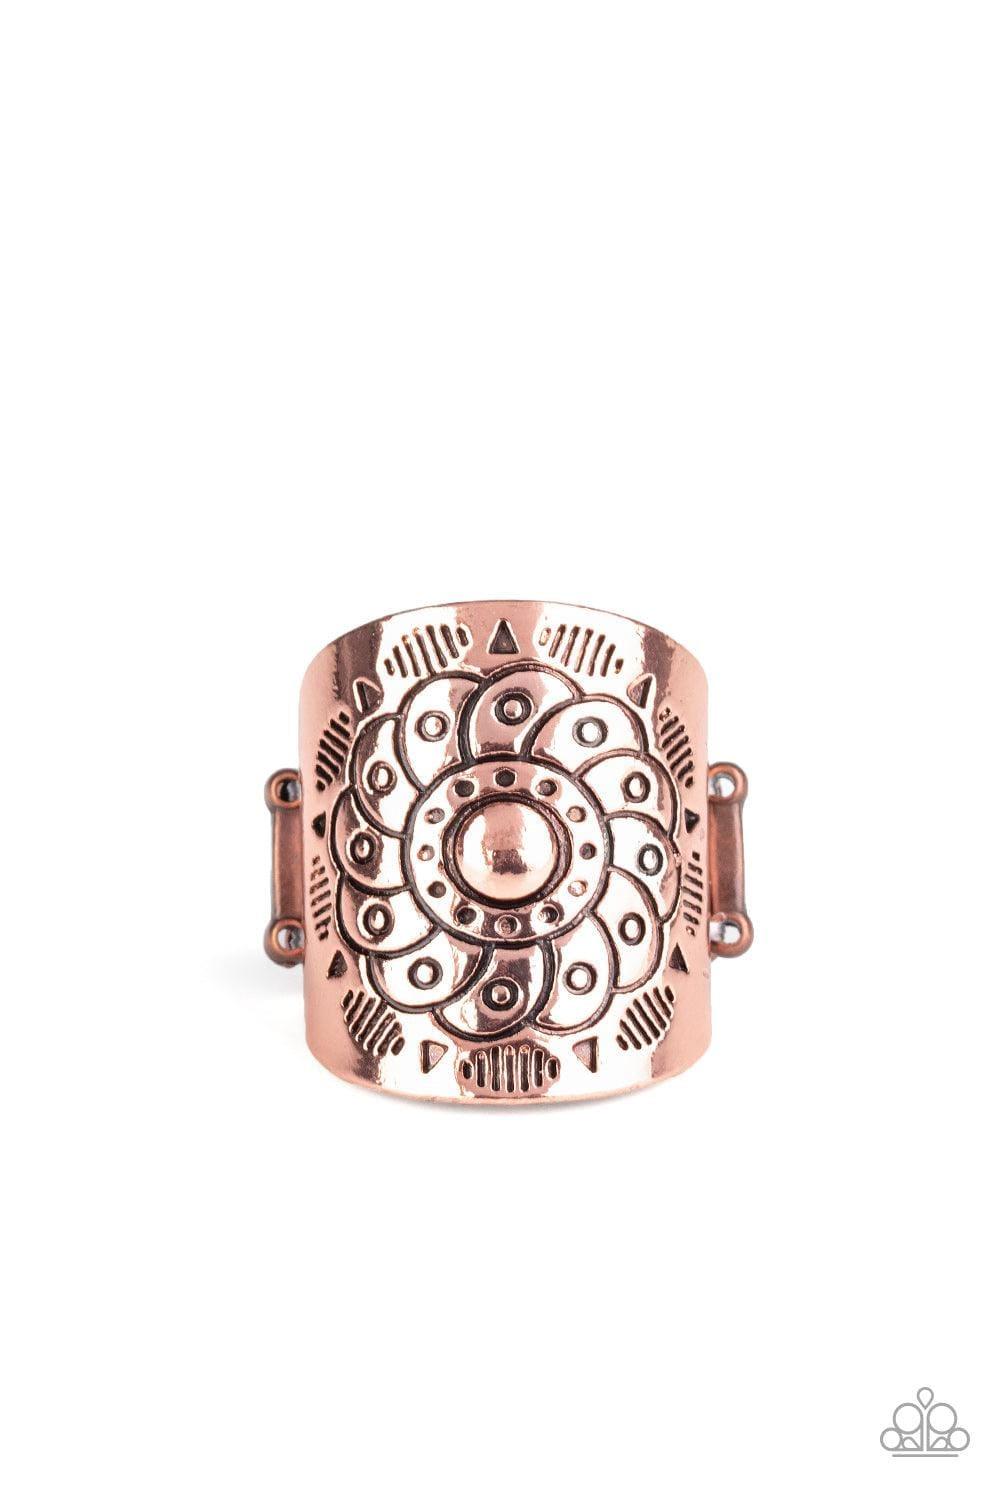 Paparazzi Accessories - Dig It - Copper Ring - Bling by JessieK